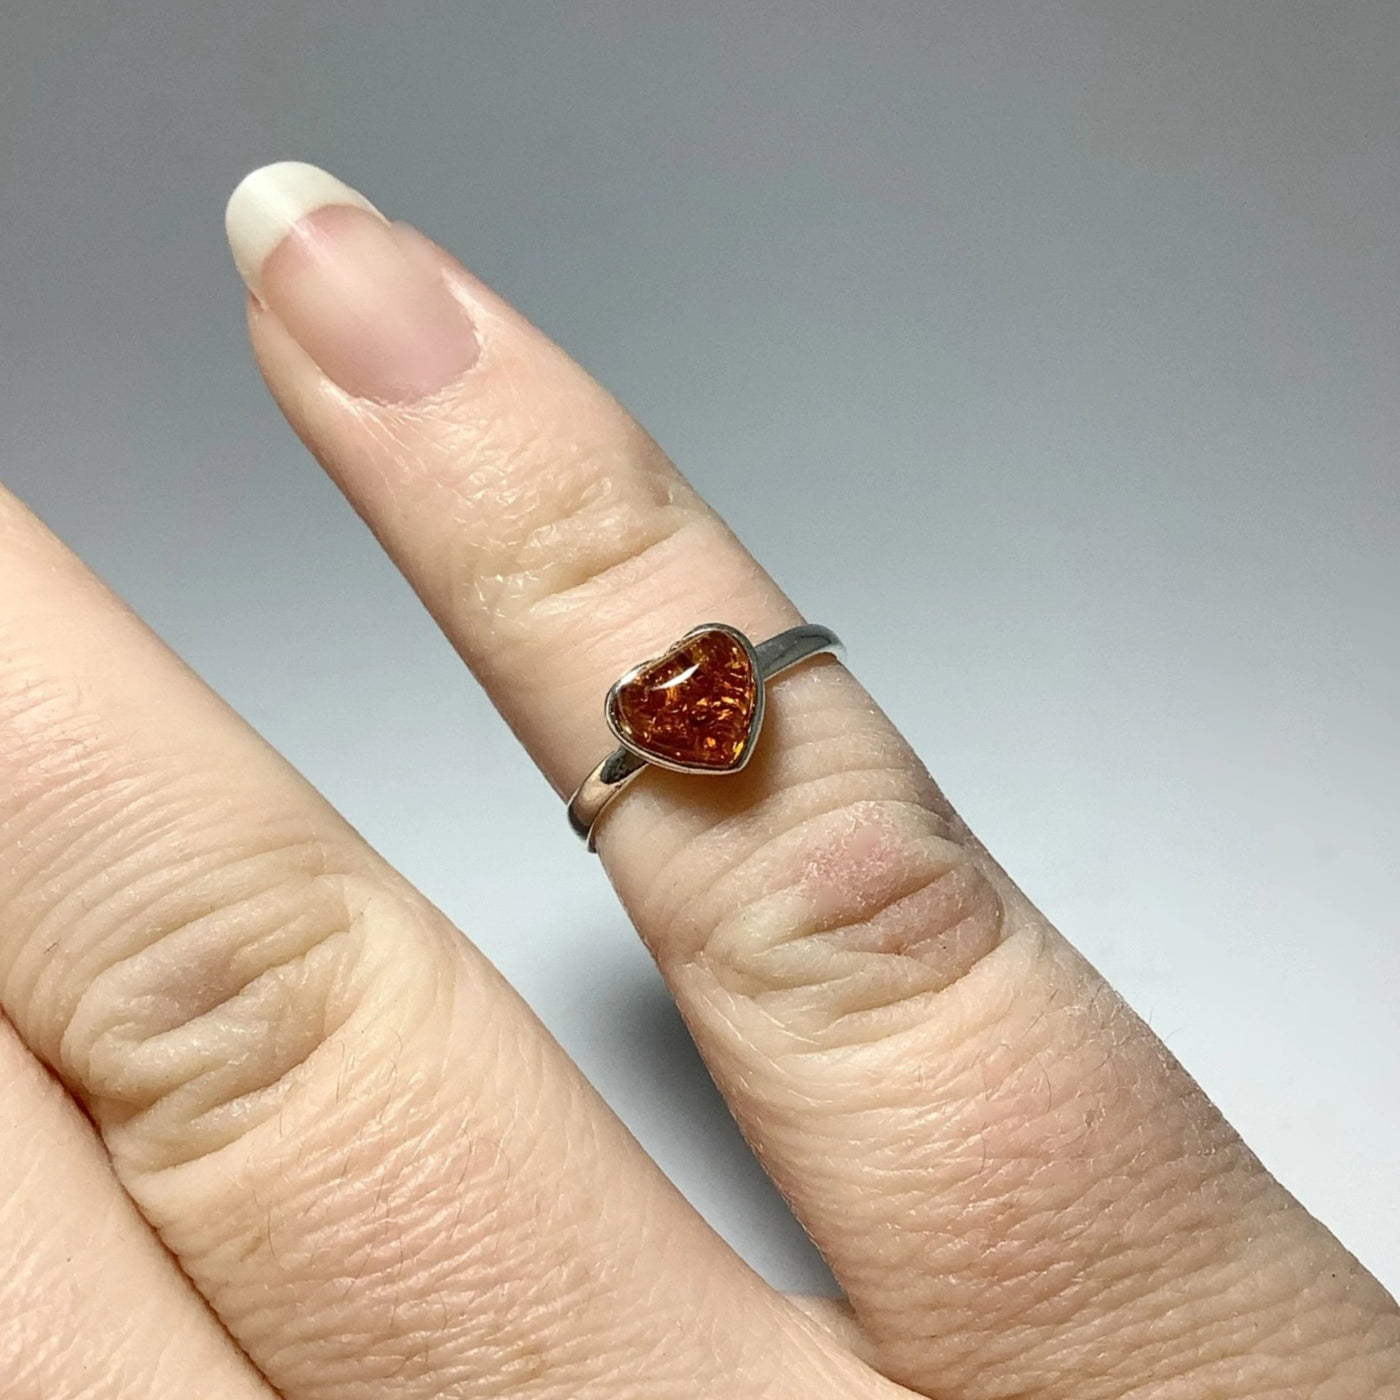 Cognac Amber Heart Ring - Small Sizes